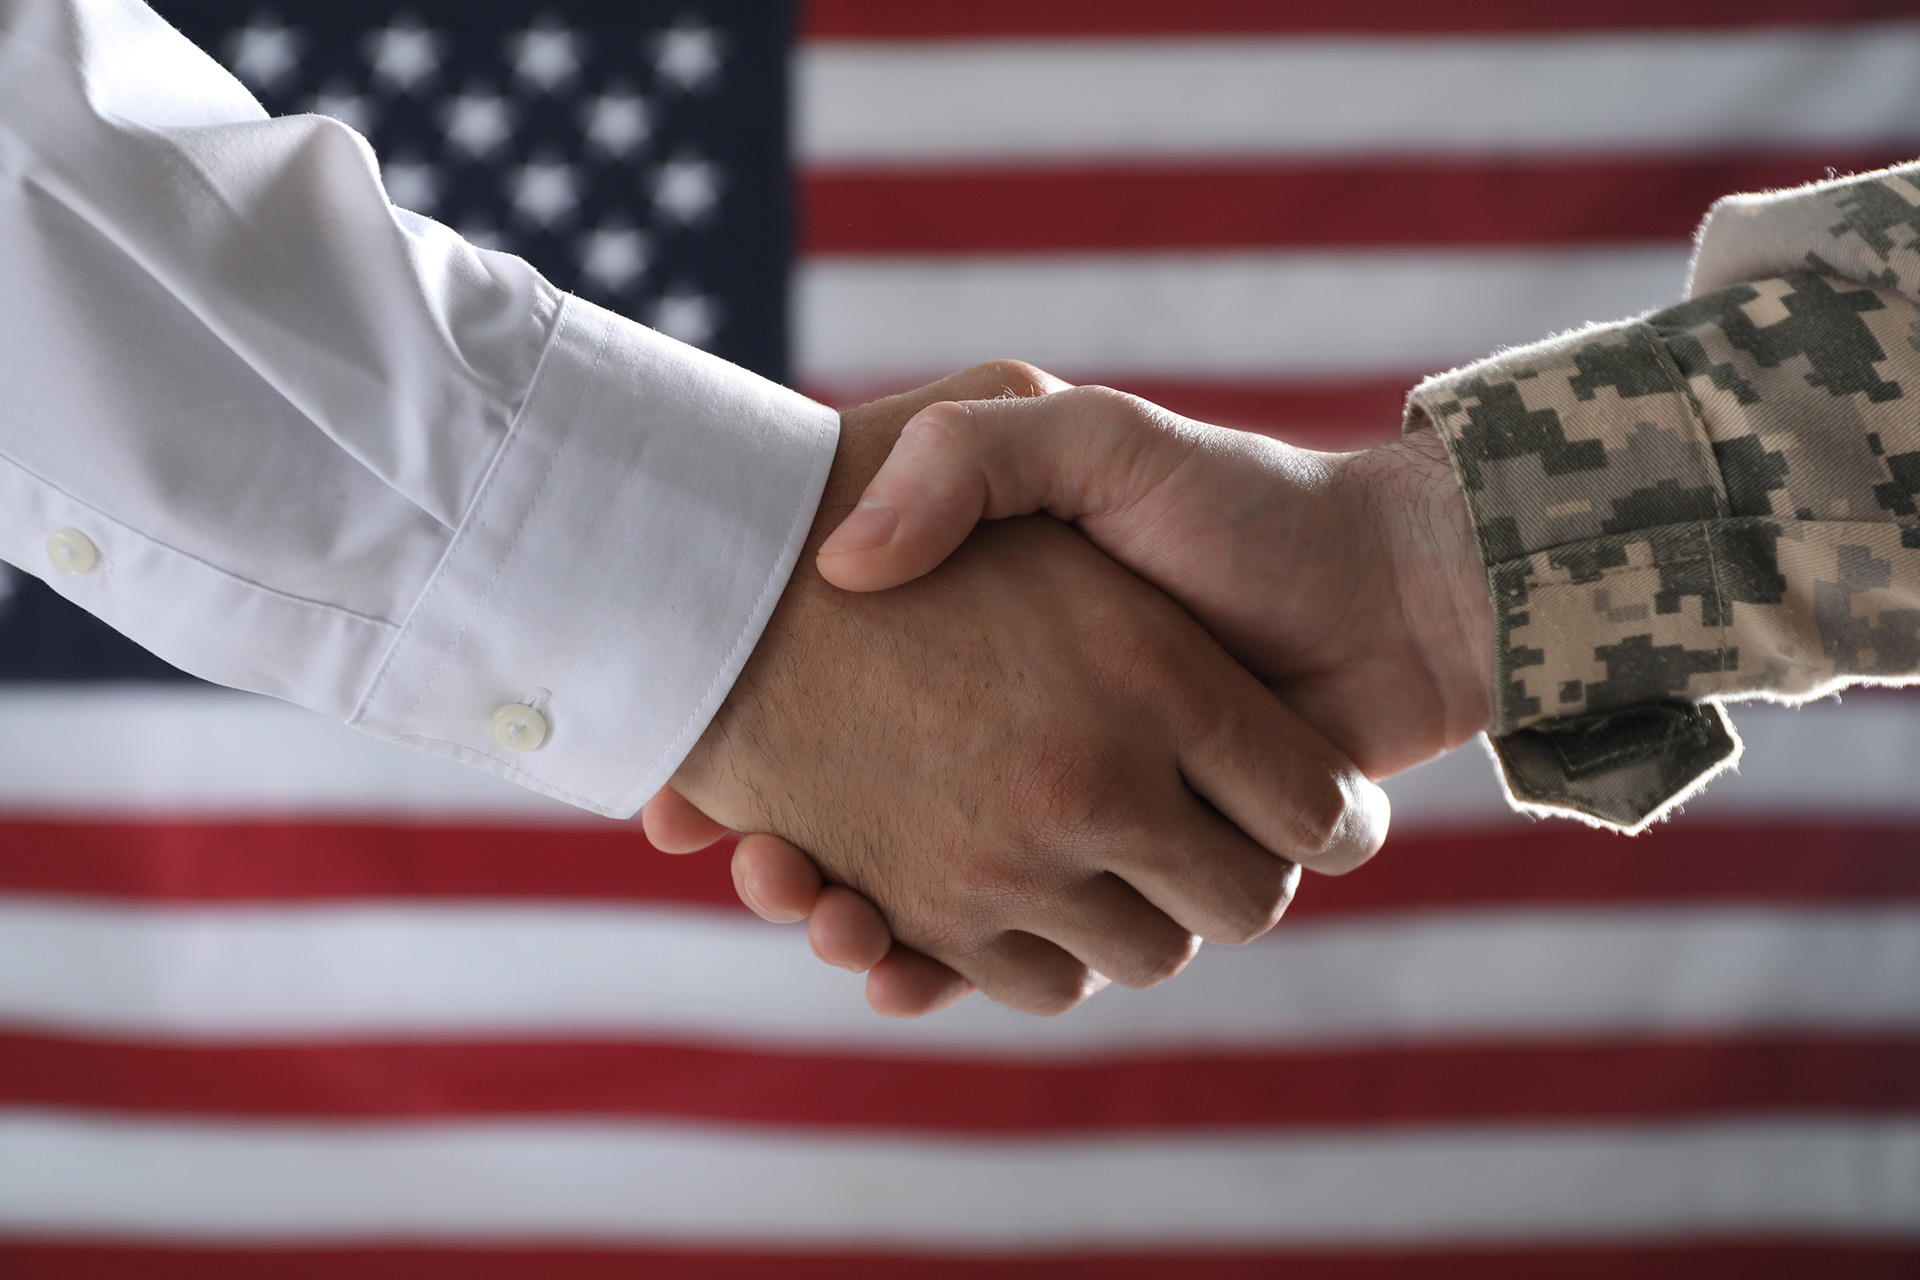 A veteran and a civilian shaking hands in front of a flag